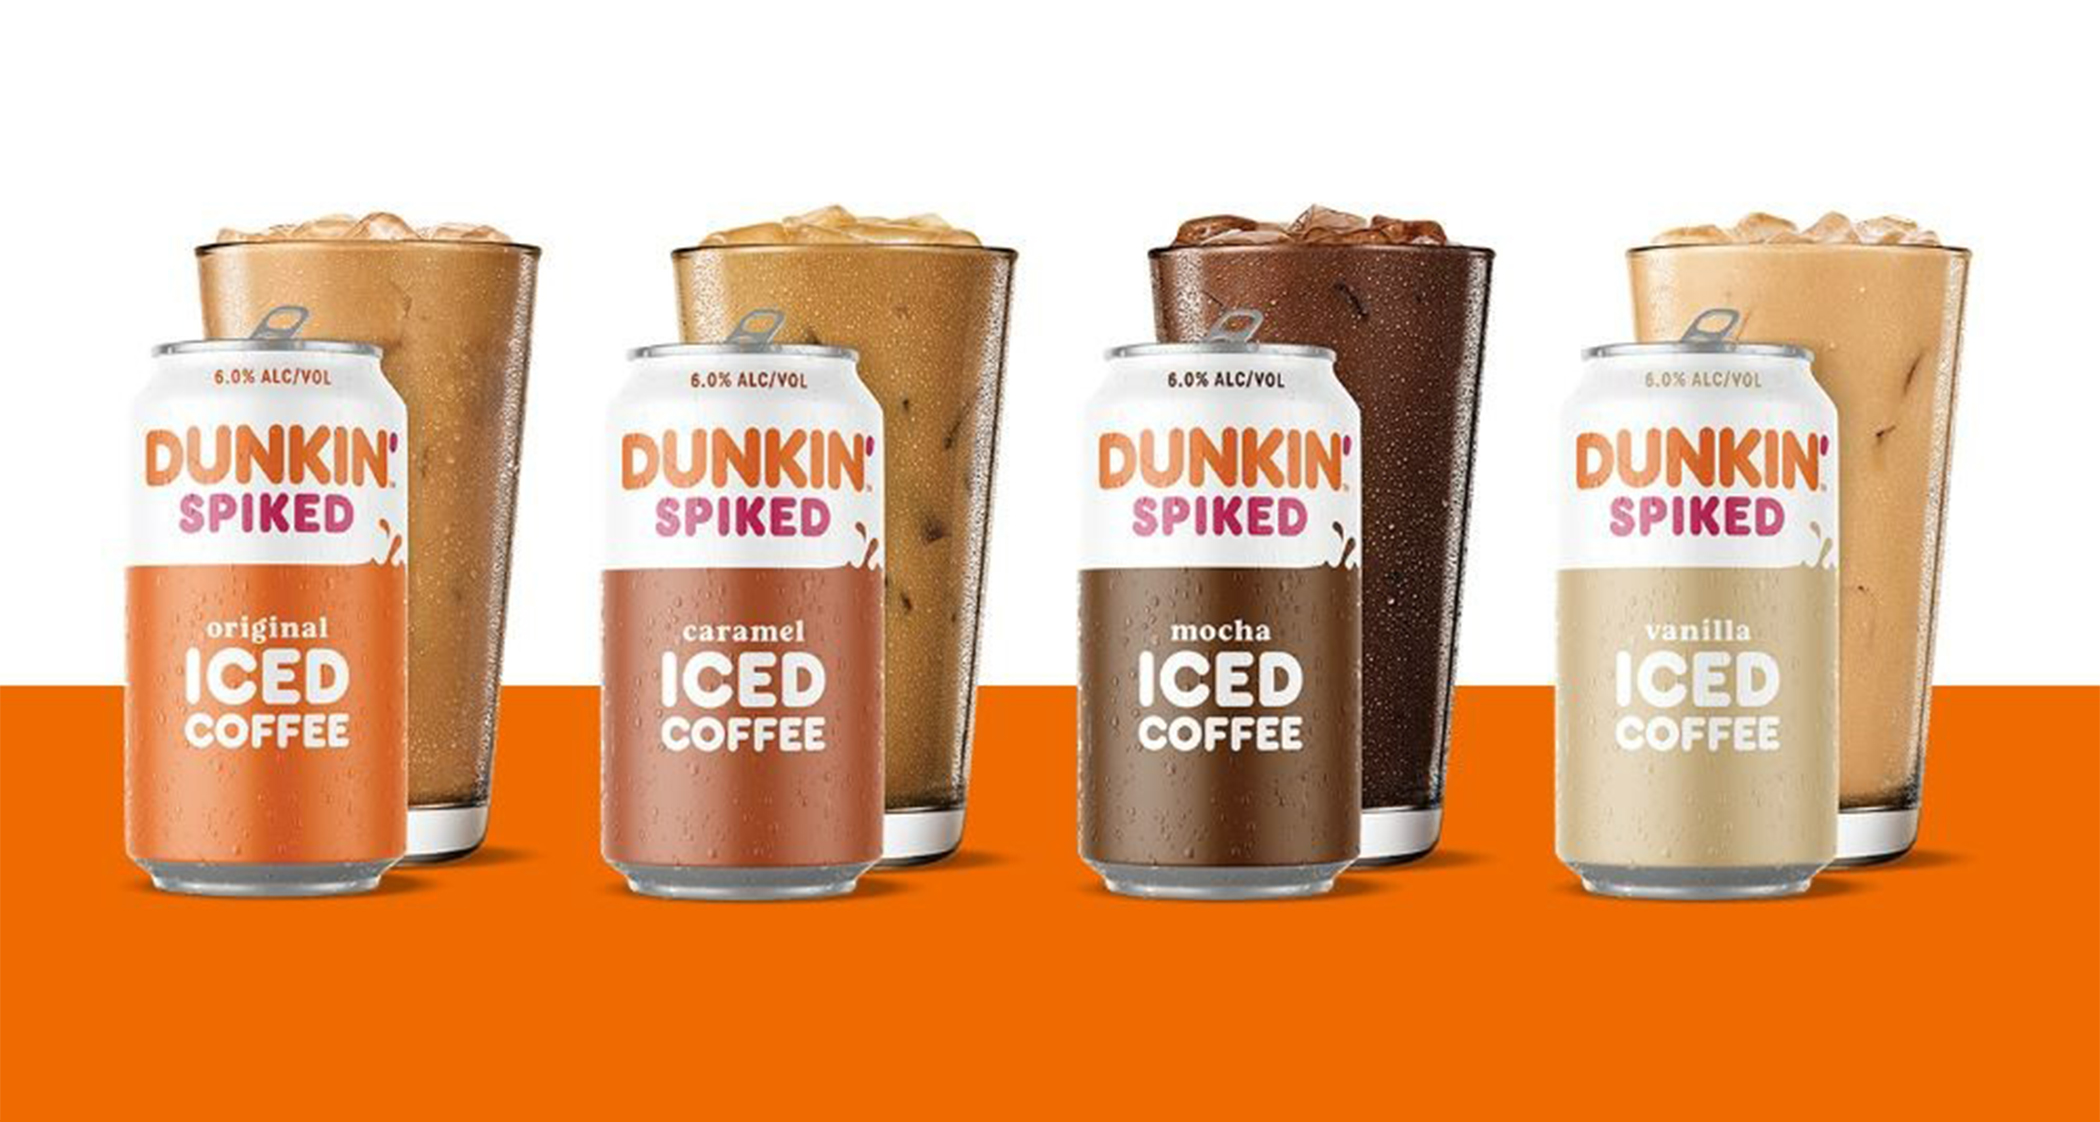 #Dunkin’ Donuts unveils new Spiked Coffee and Tea Drinks | Twitter Reacts